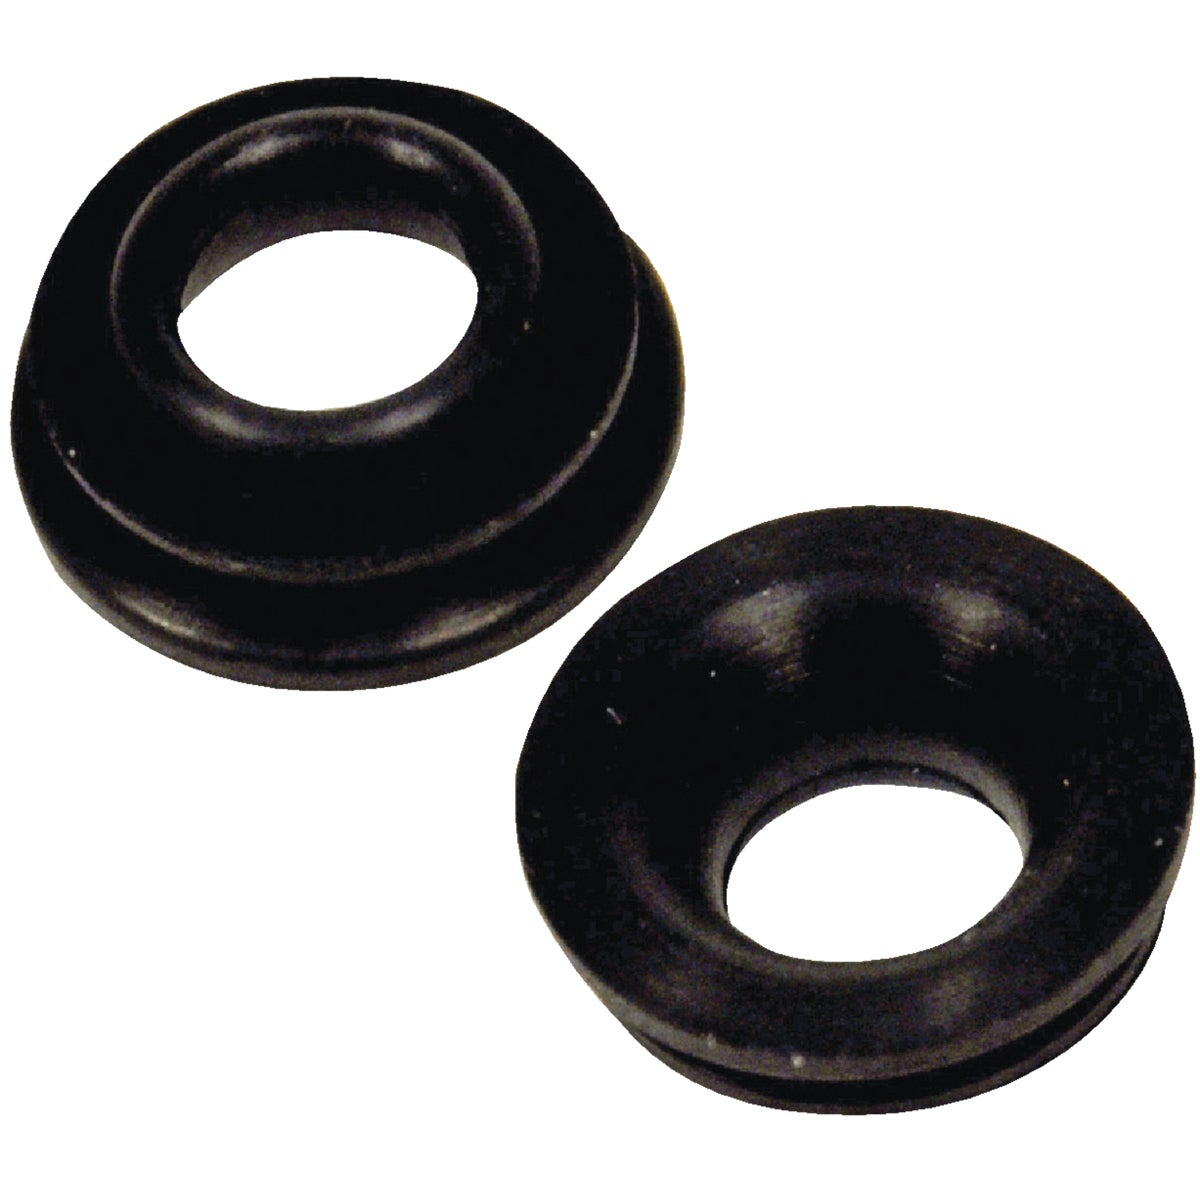 Item 447331, Faucet seat washers for Price Pfister washerless stems.